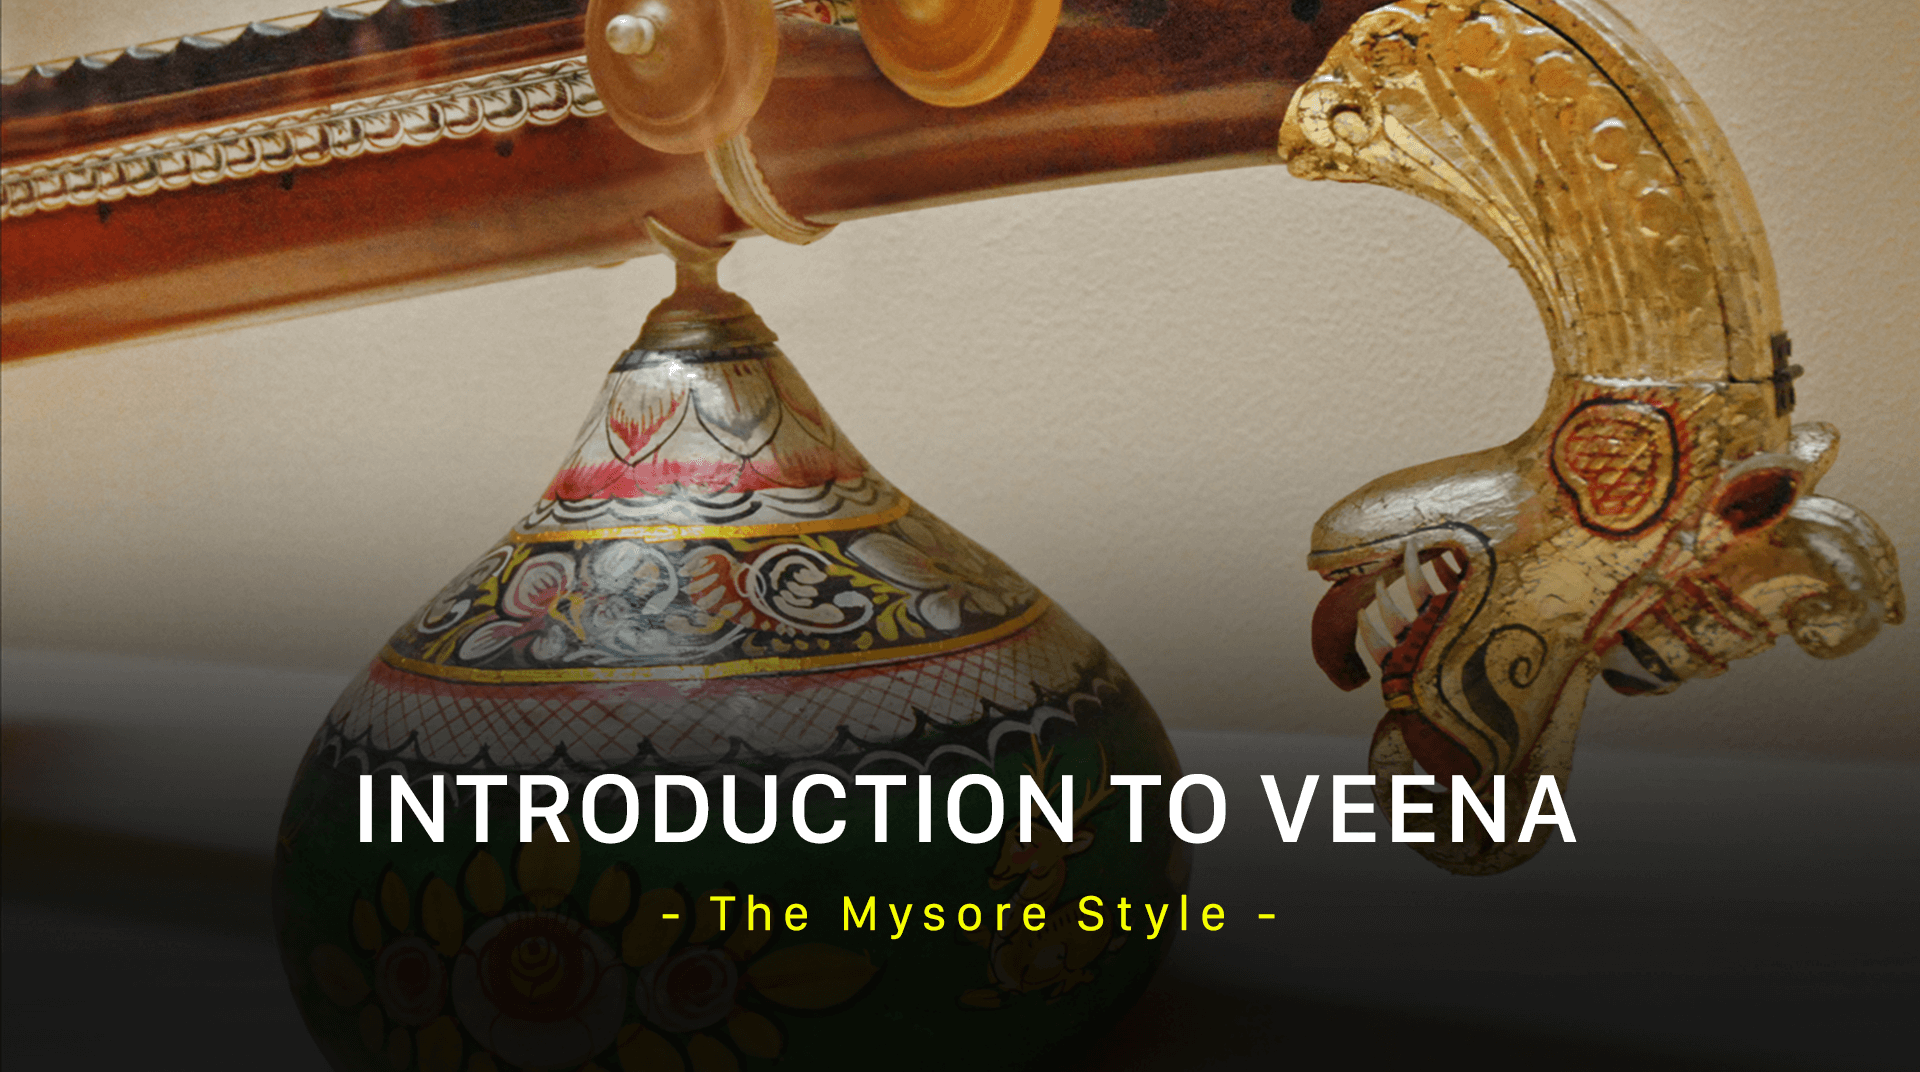 Introduction to Veena - The Mysore Style